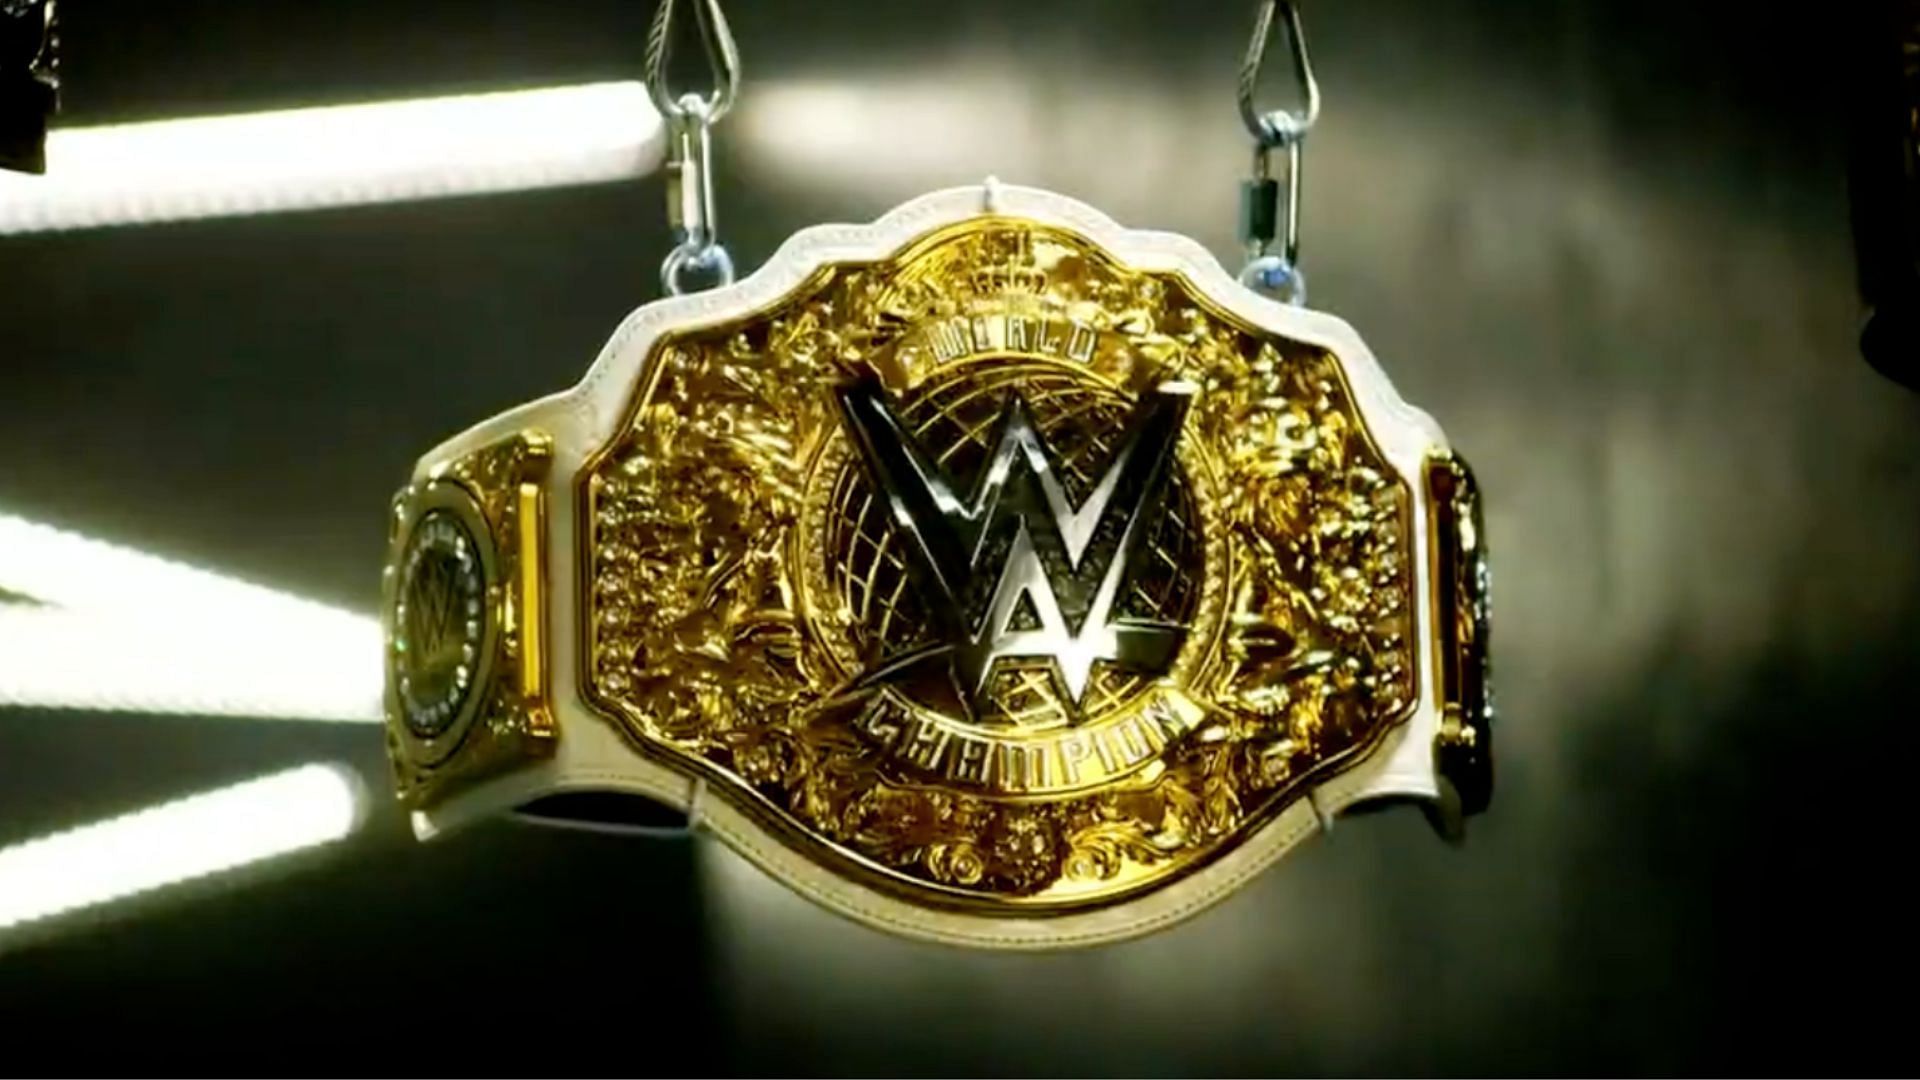 A new champion will be crowned tomorrow night on RAW.